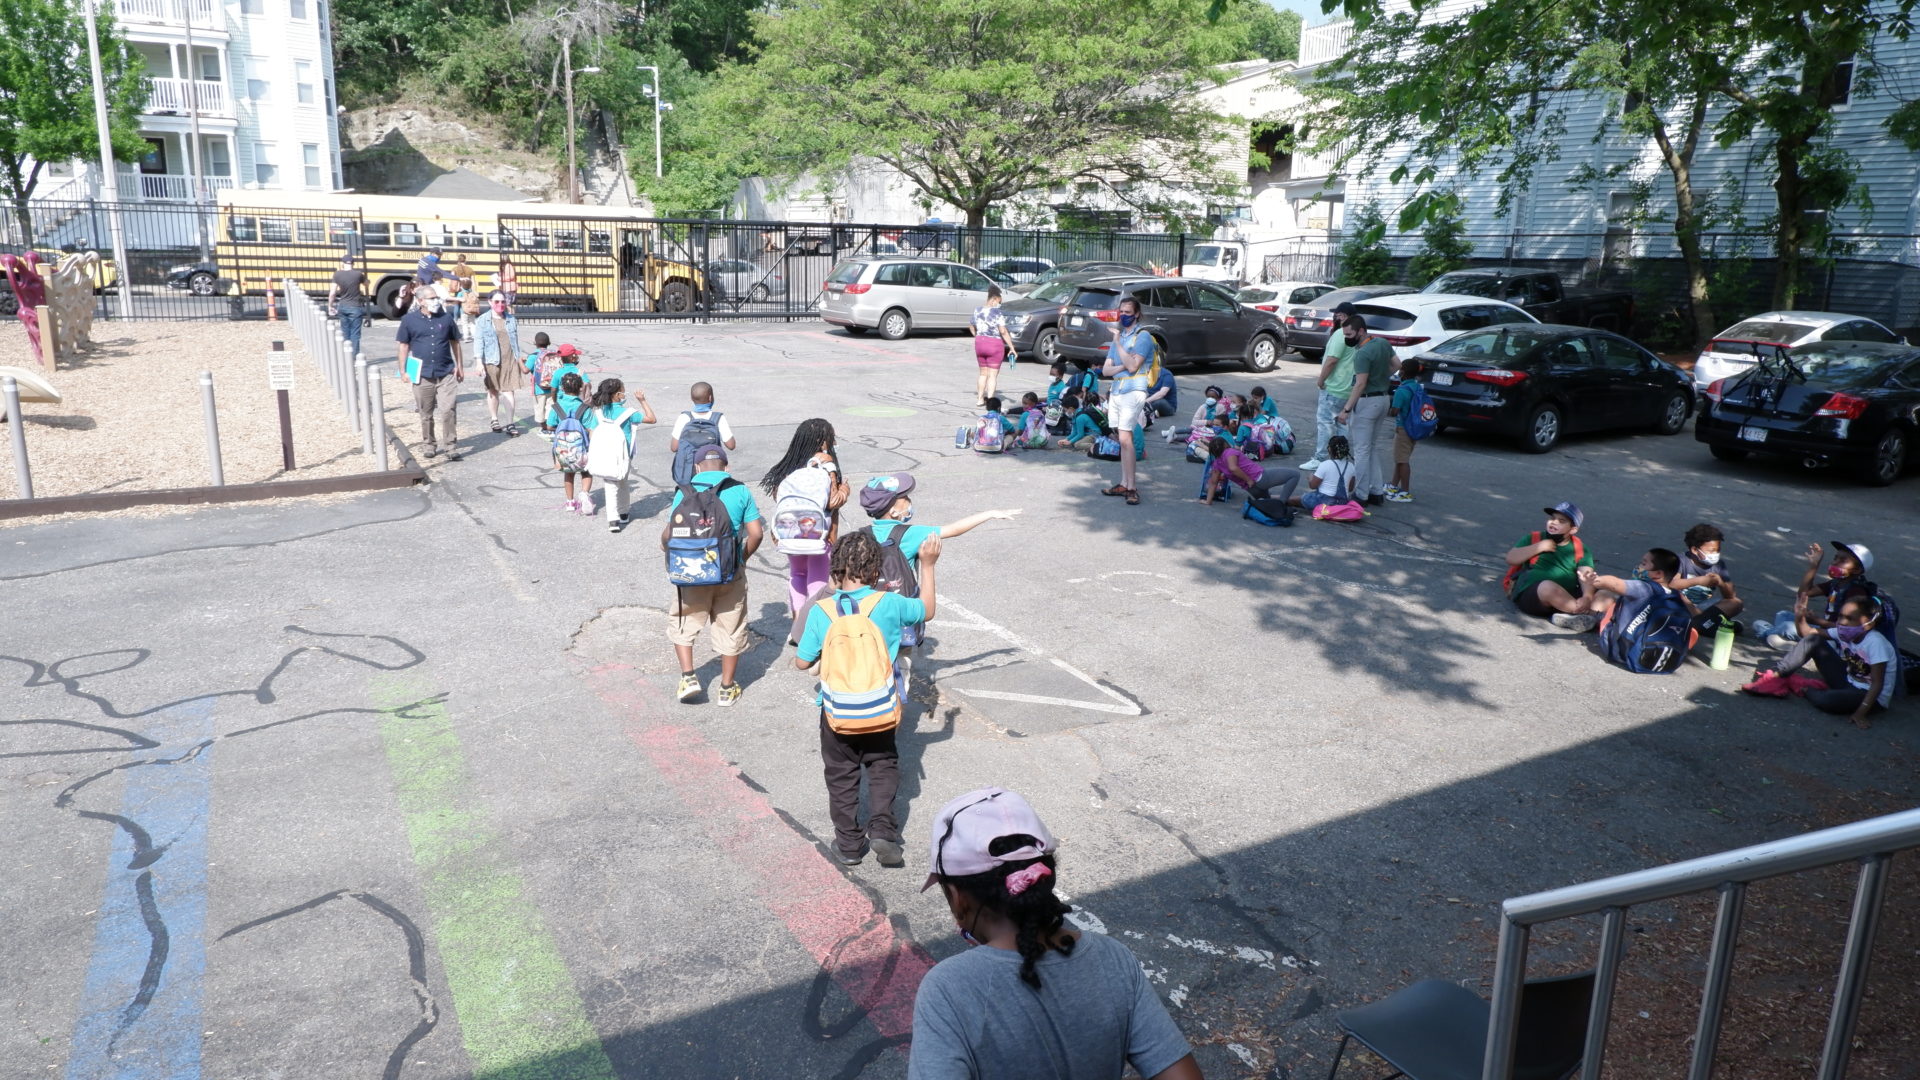 A line of students walks towards the school bus at the Lower School